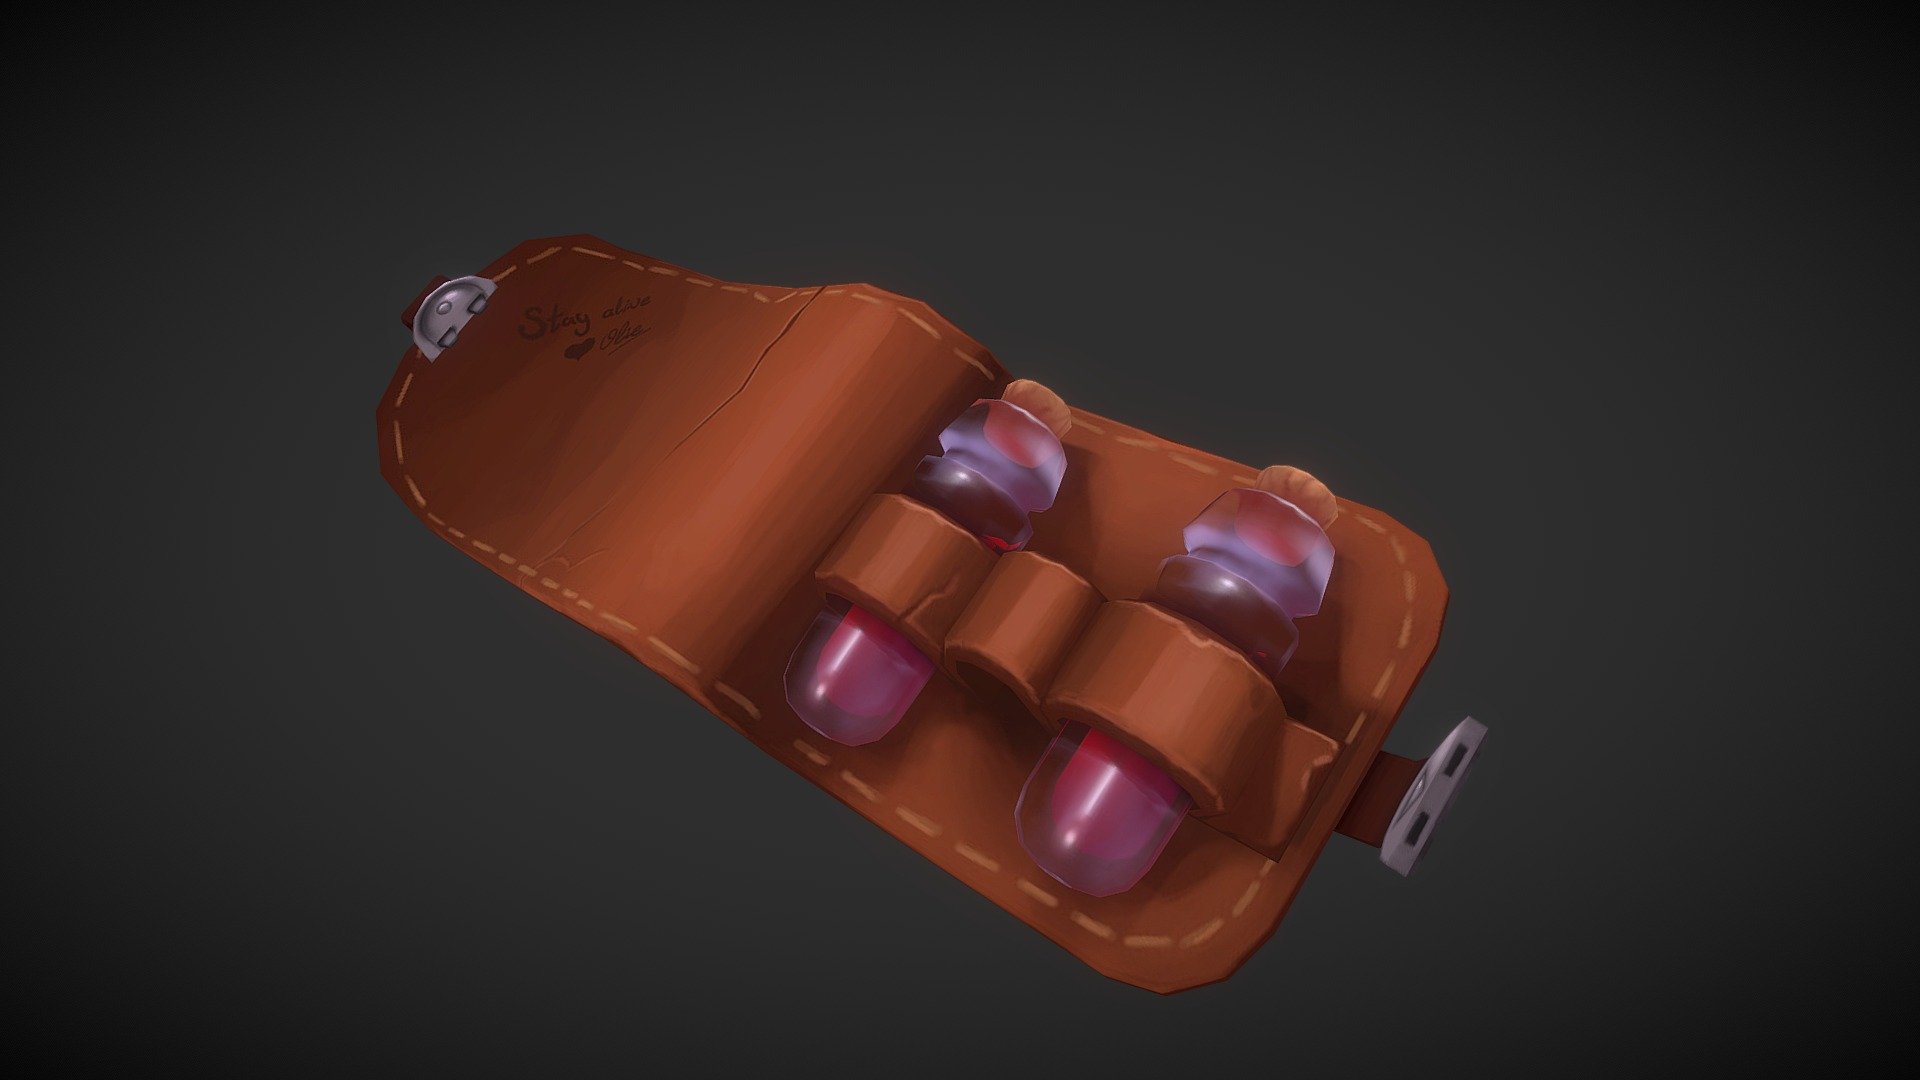 Health kit here!

Last minute decision to participate in Sketchfab Weekly Challenge.
Figured I use this opportunity to make some props and work on material studies 3d model